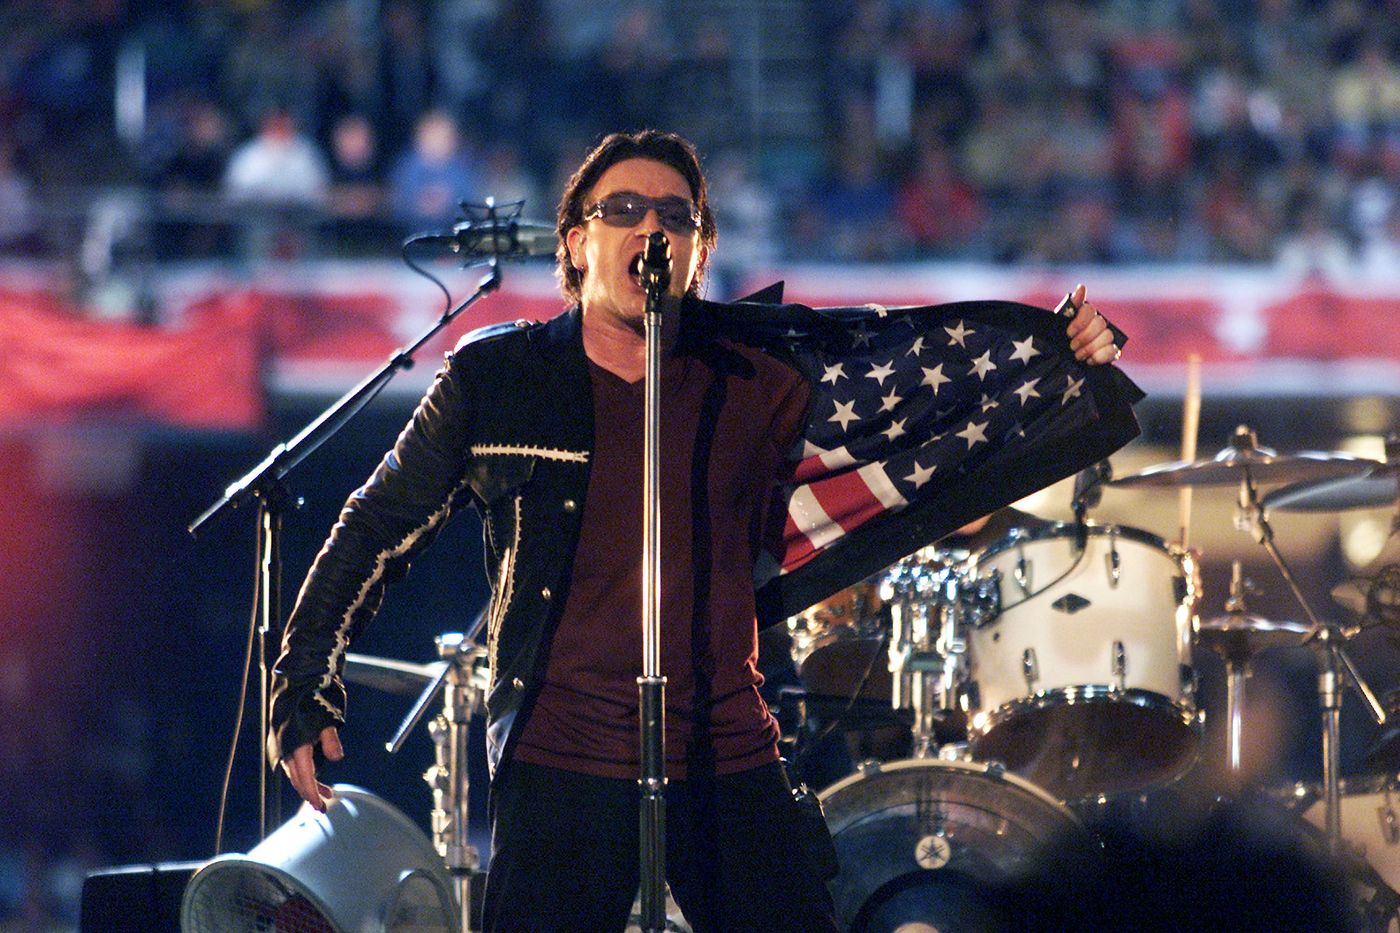 Super Bowl Halftime Shows: List of Performers from 2004 to Now